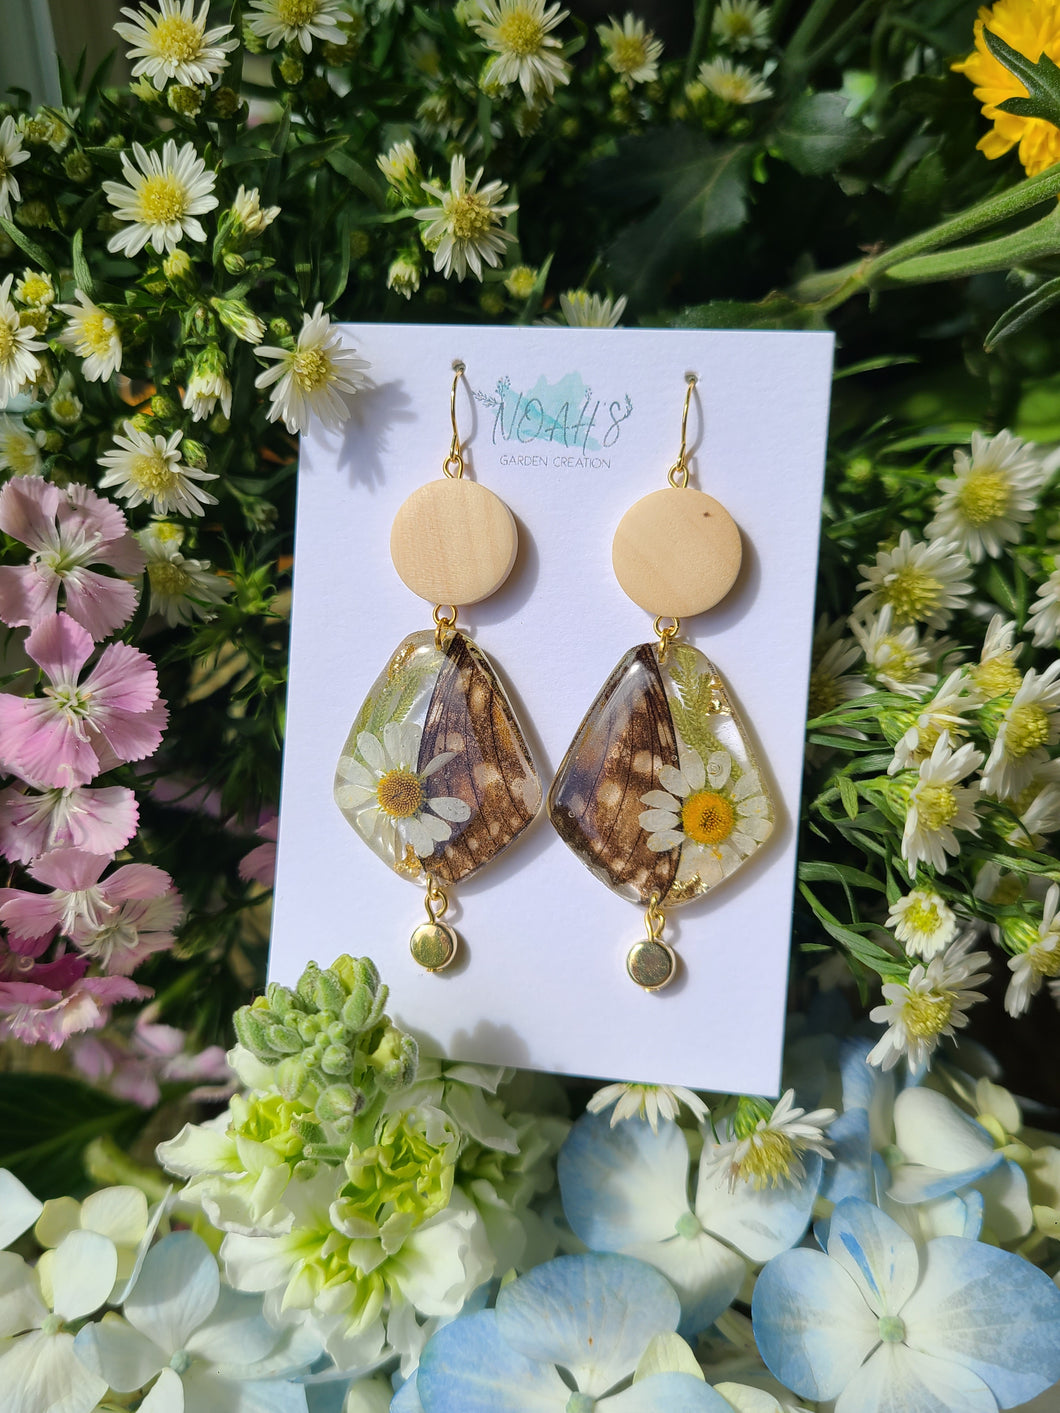 Spring Butterfly Collection- embedded Monarch Wings in resin, small tear drop shaped, wooden beads